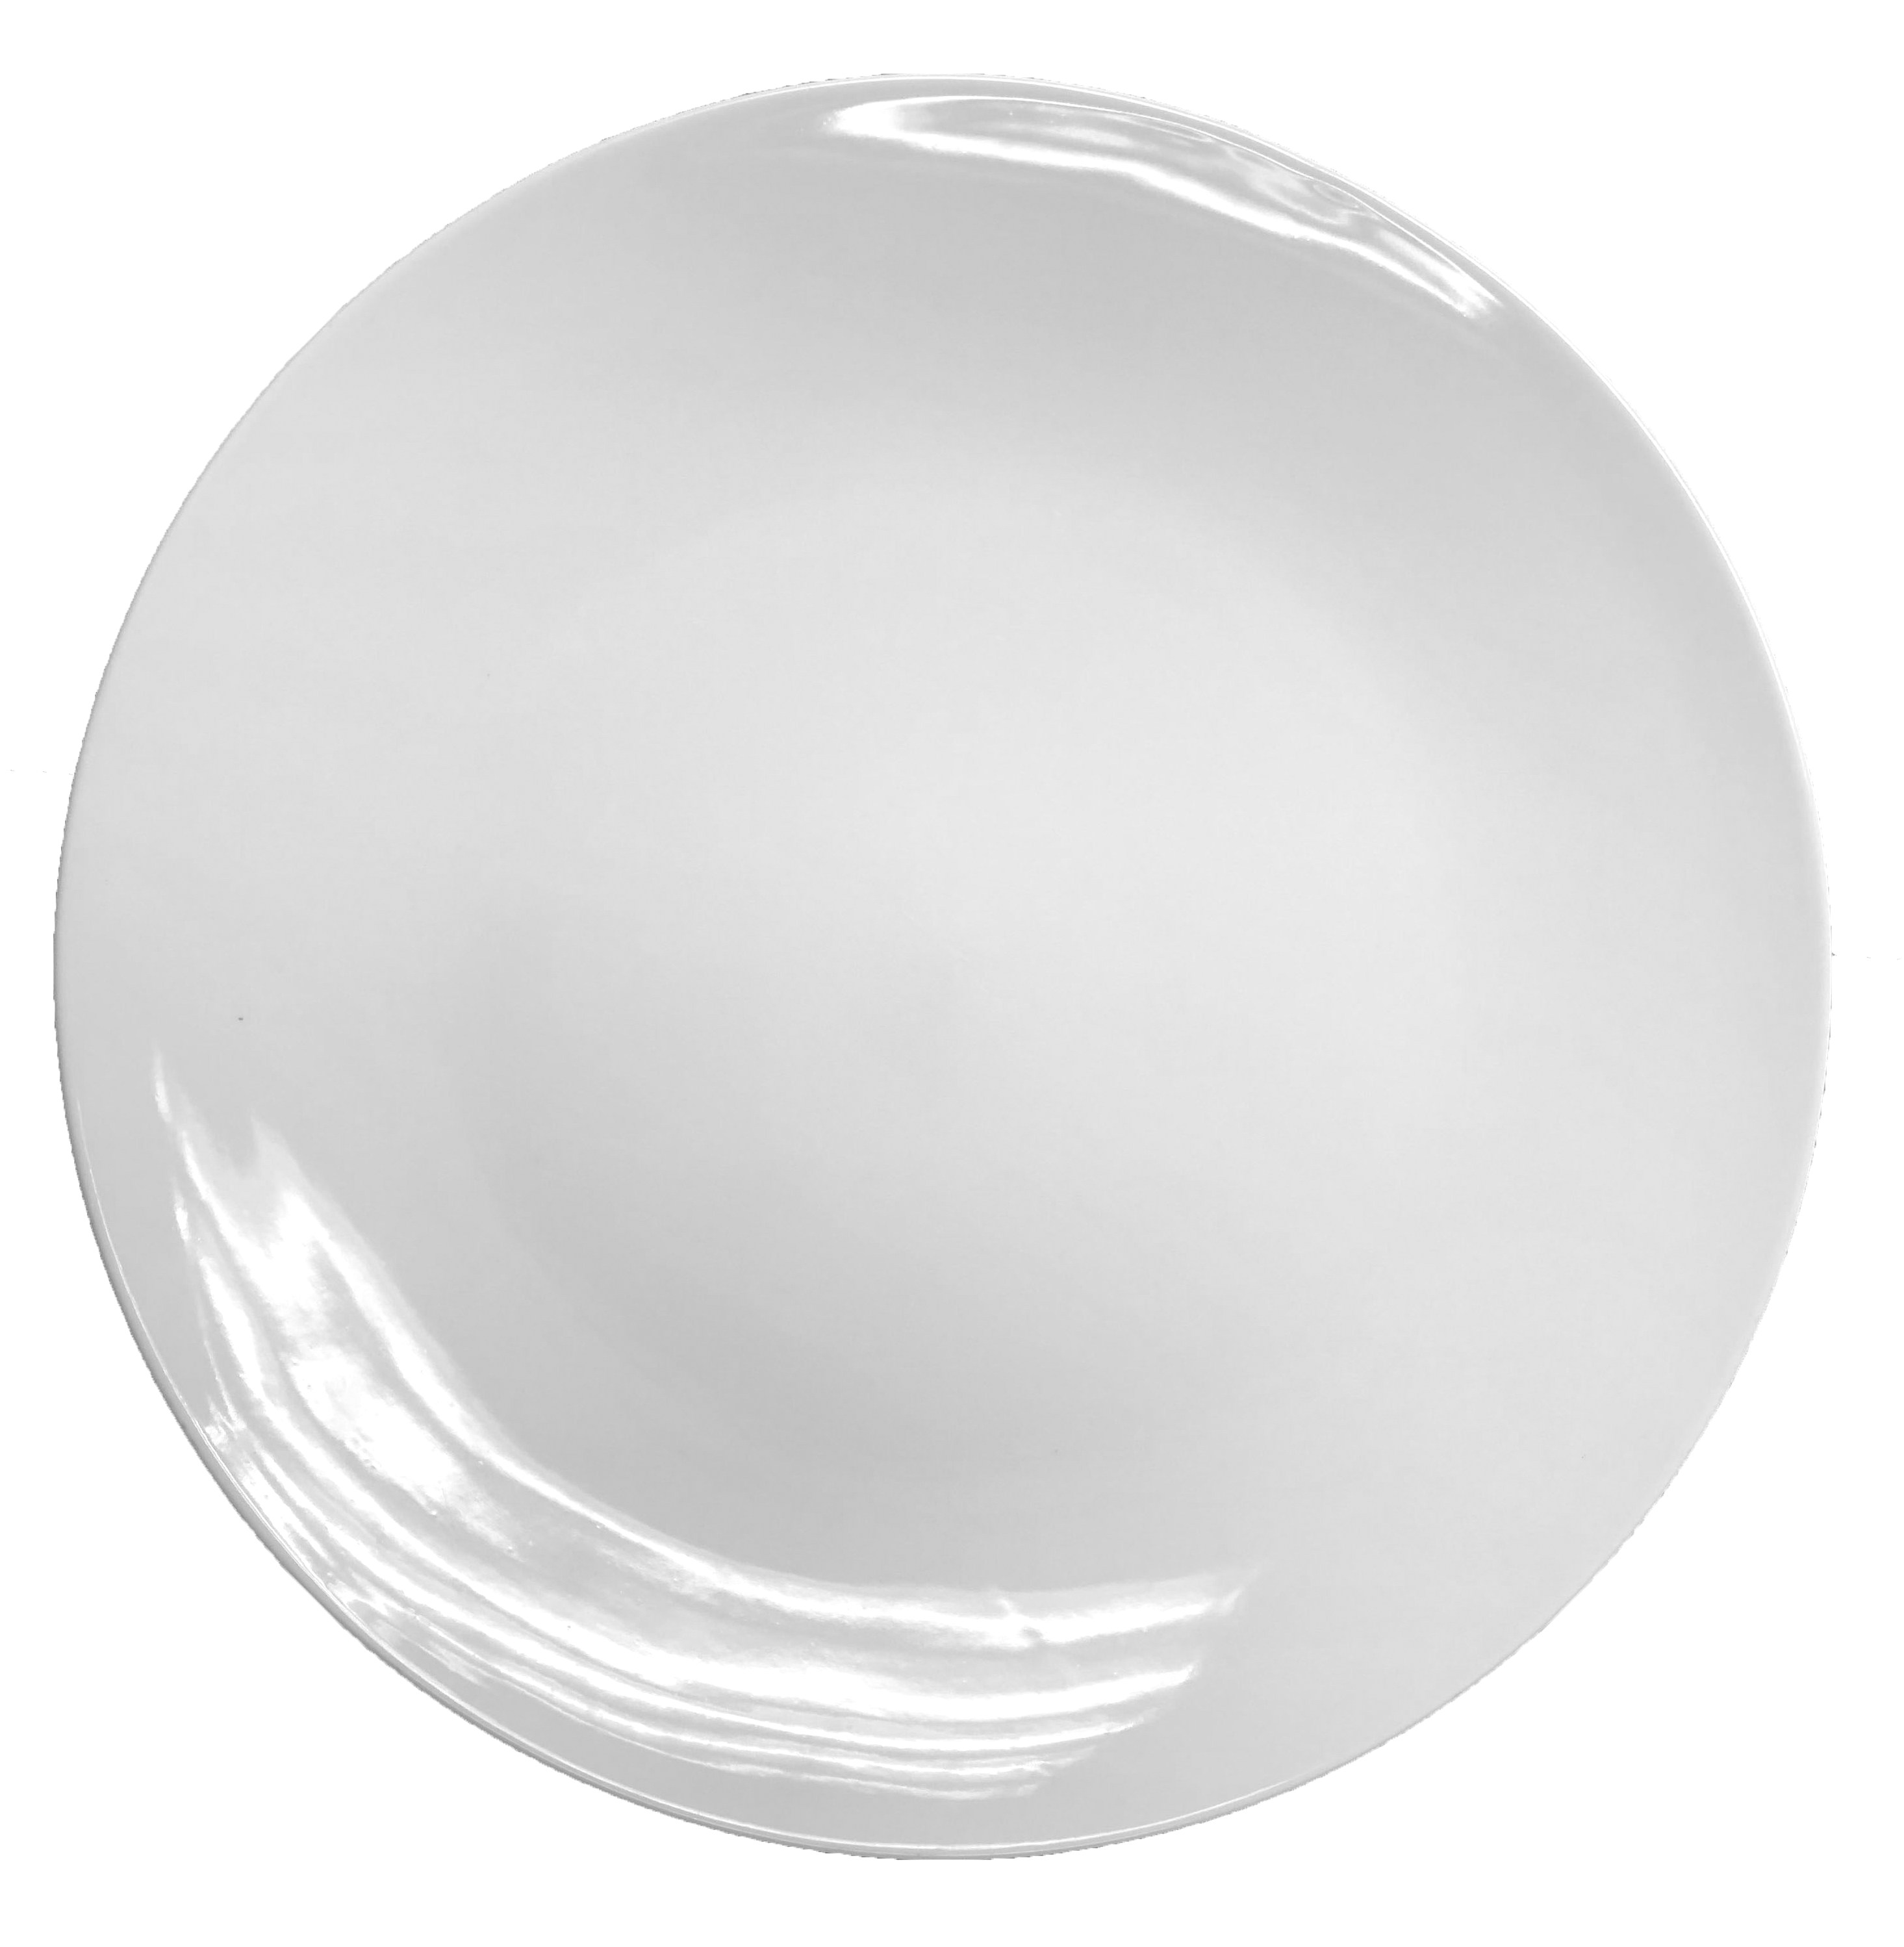 category_D2004 - Round Platter 16